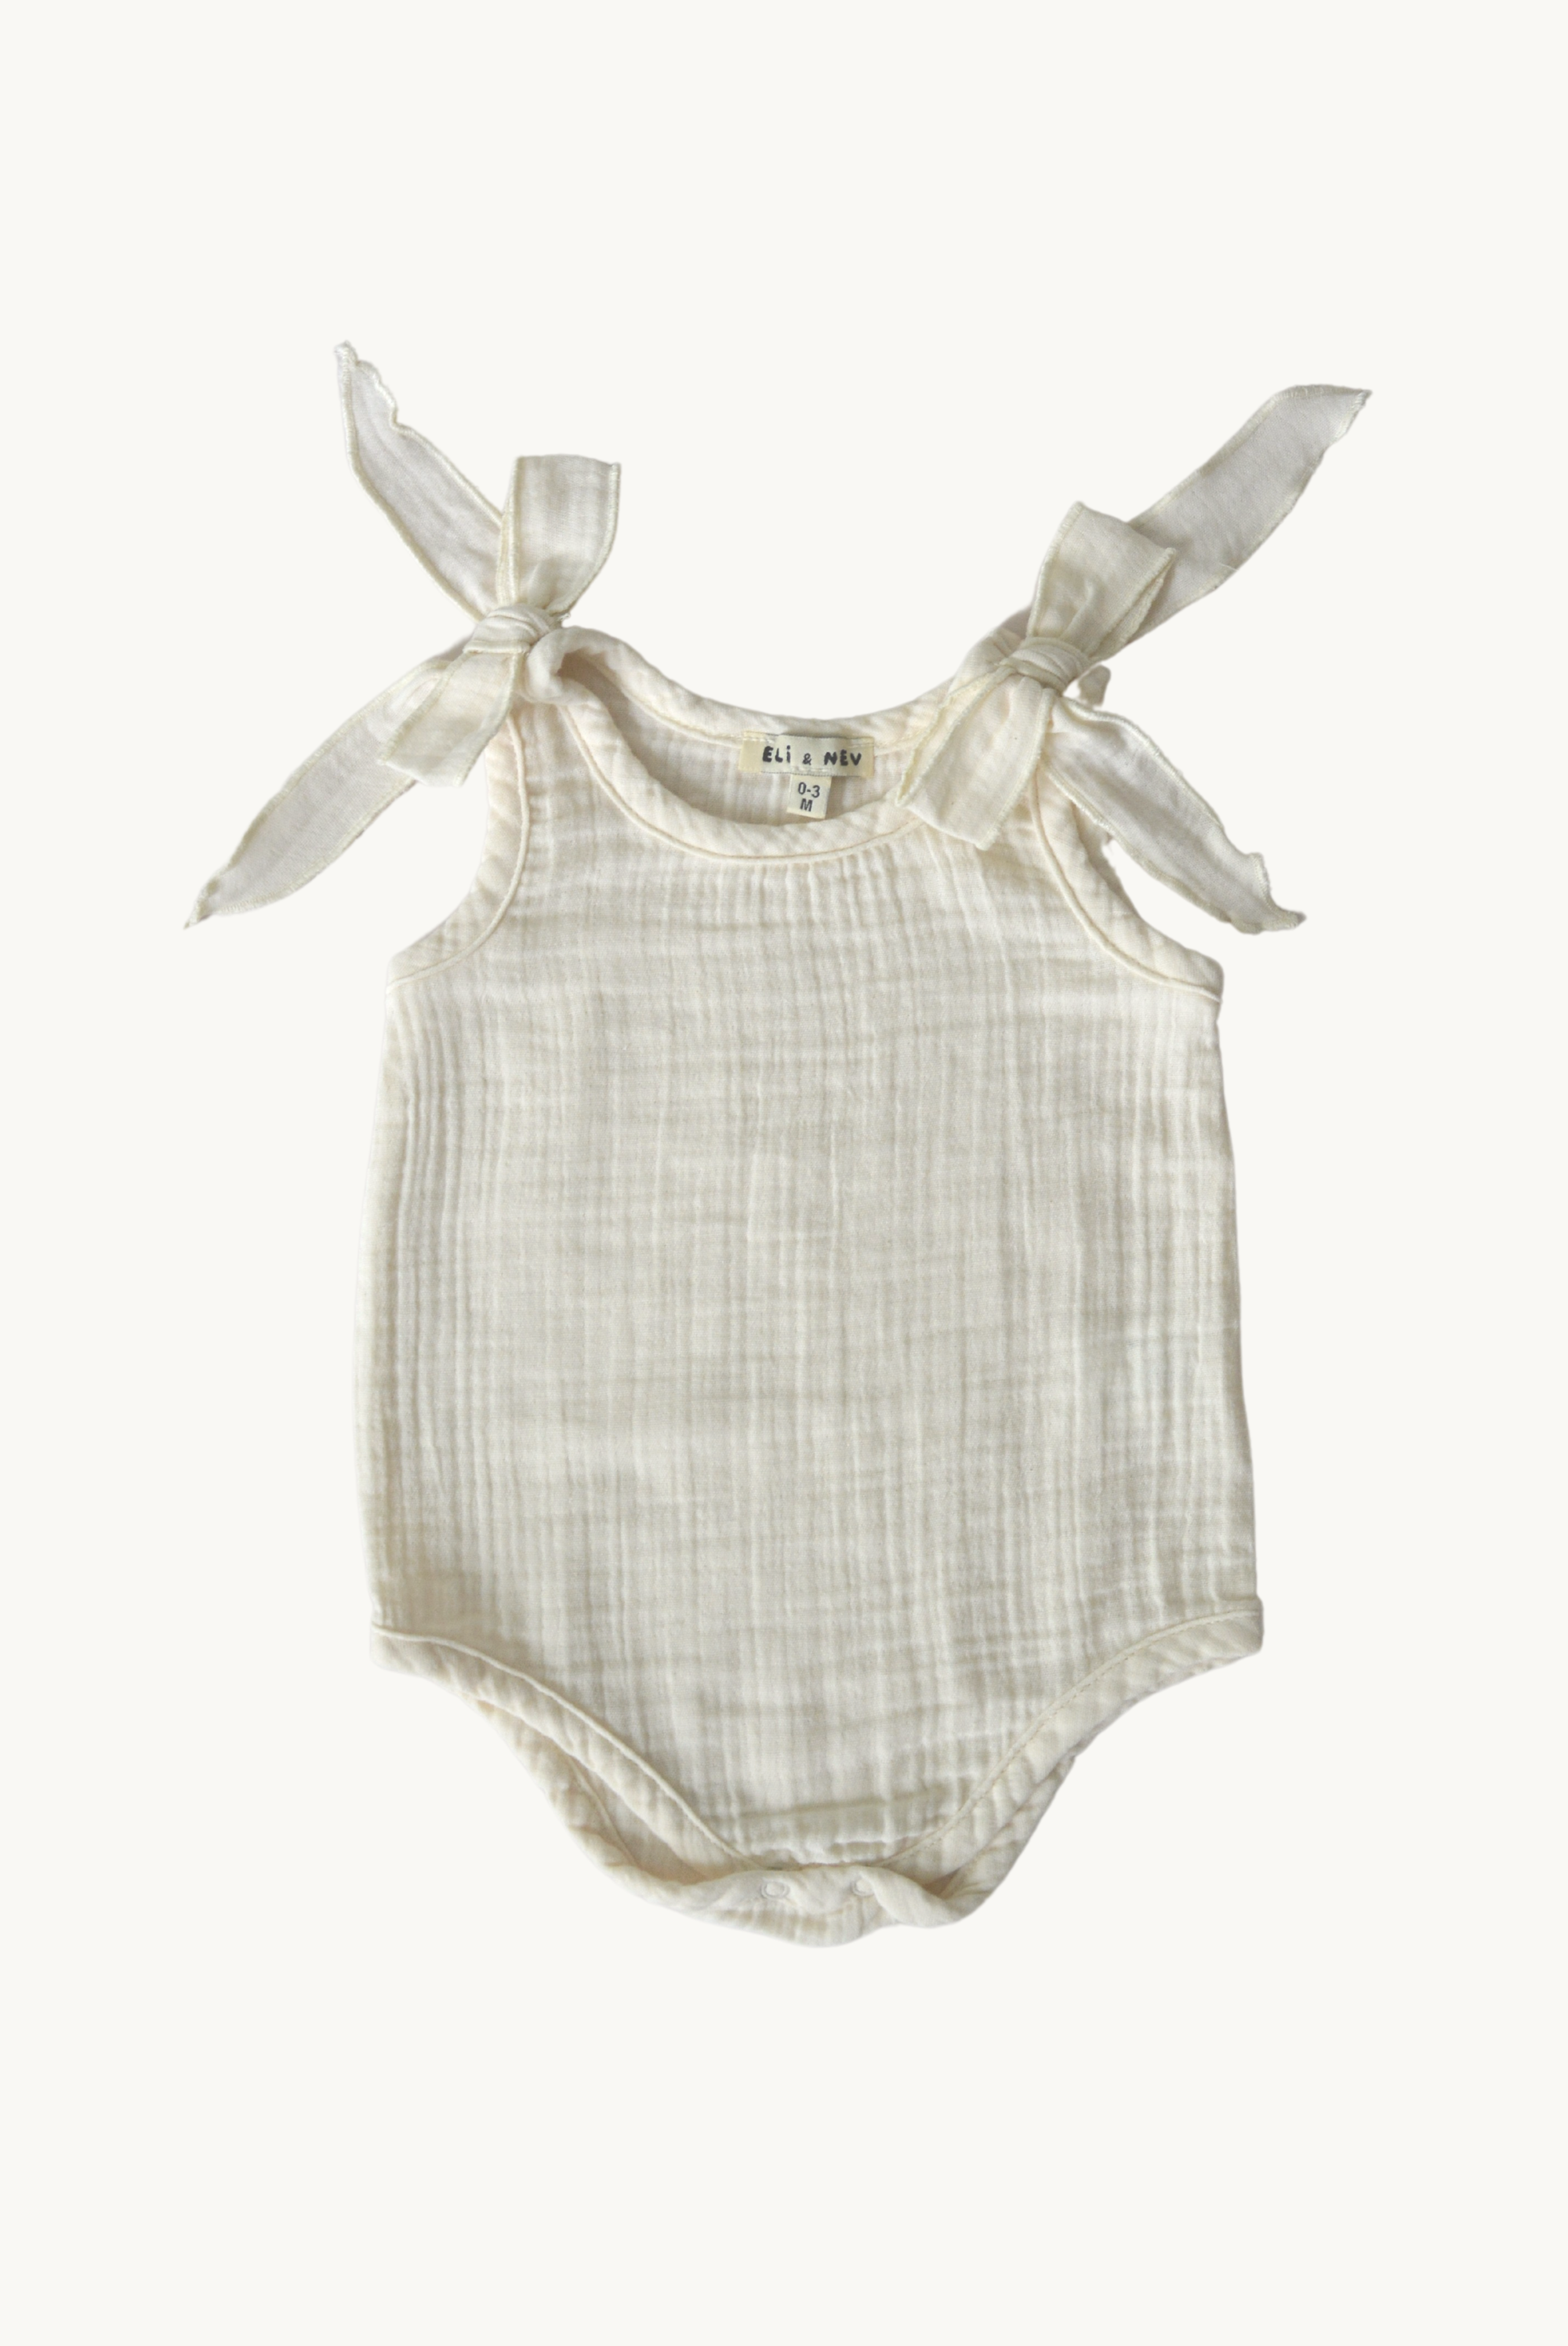 NORA romper - summer muslin bodysuit for babies made from 100% cotton